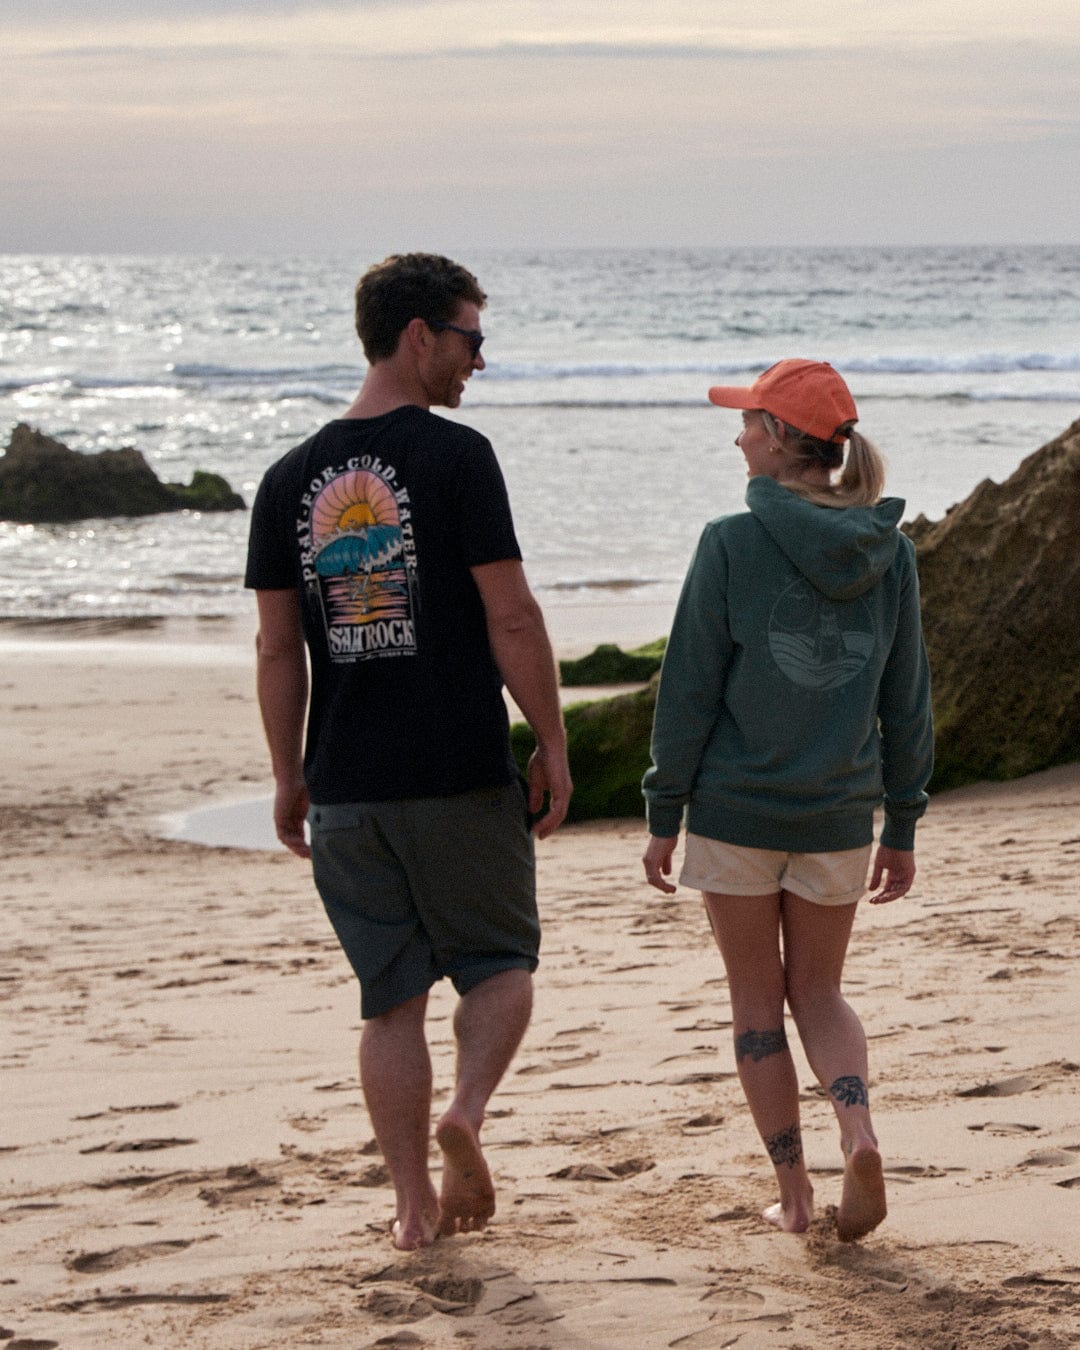 A man and woman walking on a beach wearing Saltrock Cold Water - Mens Short Sleeve T-Shirt - Black clothing.